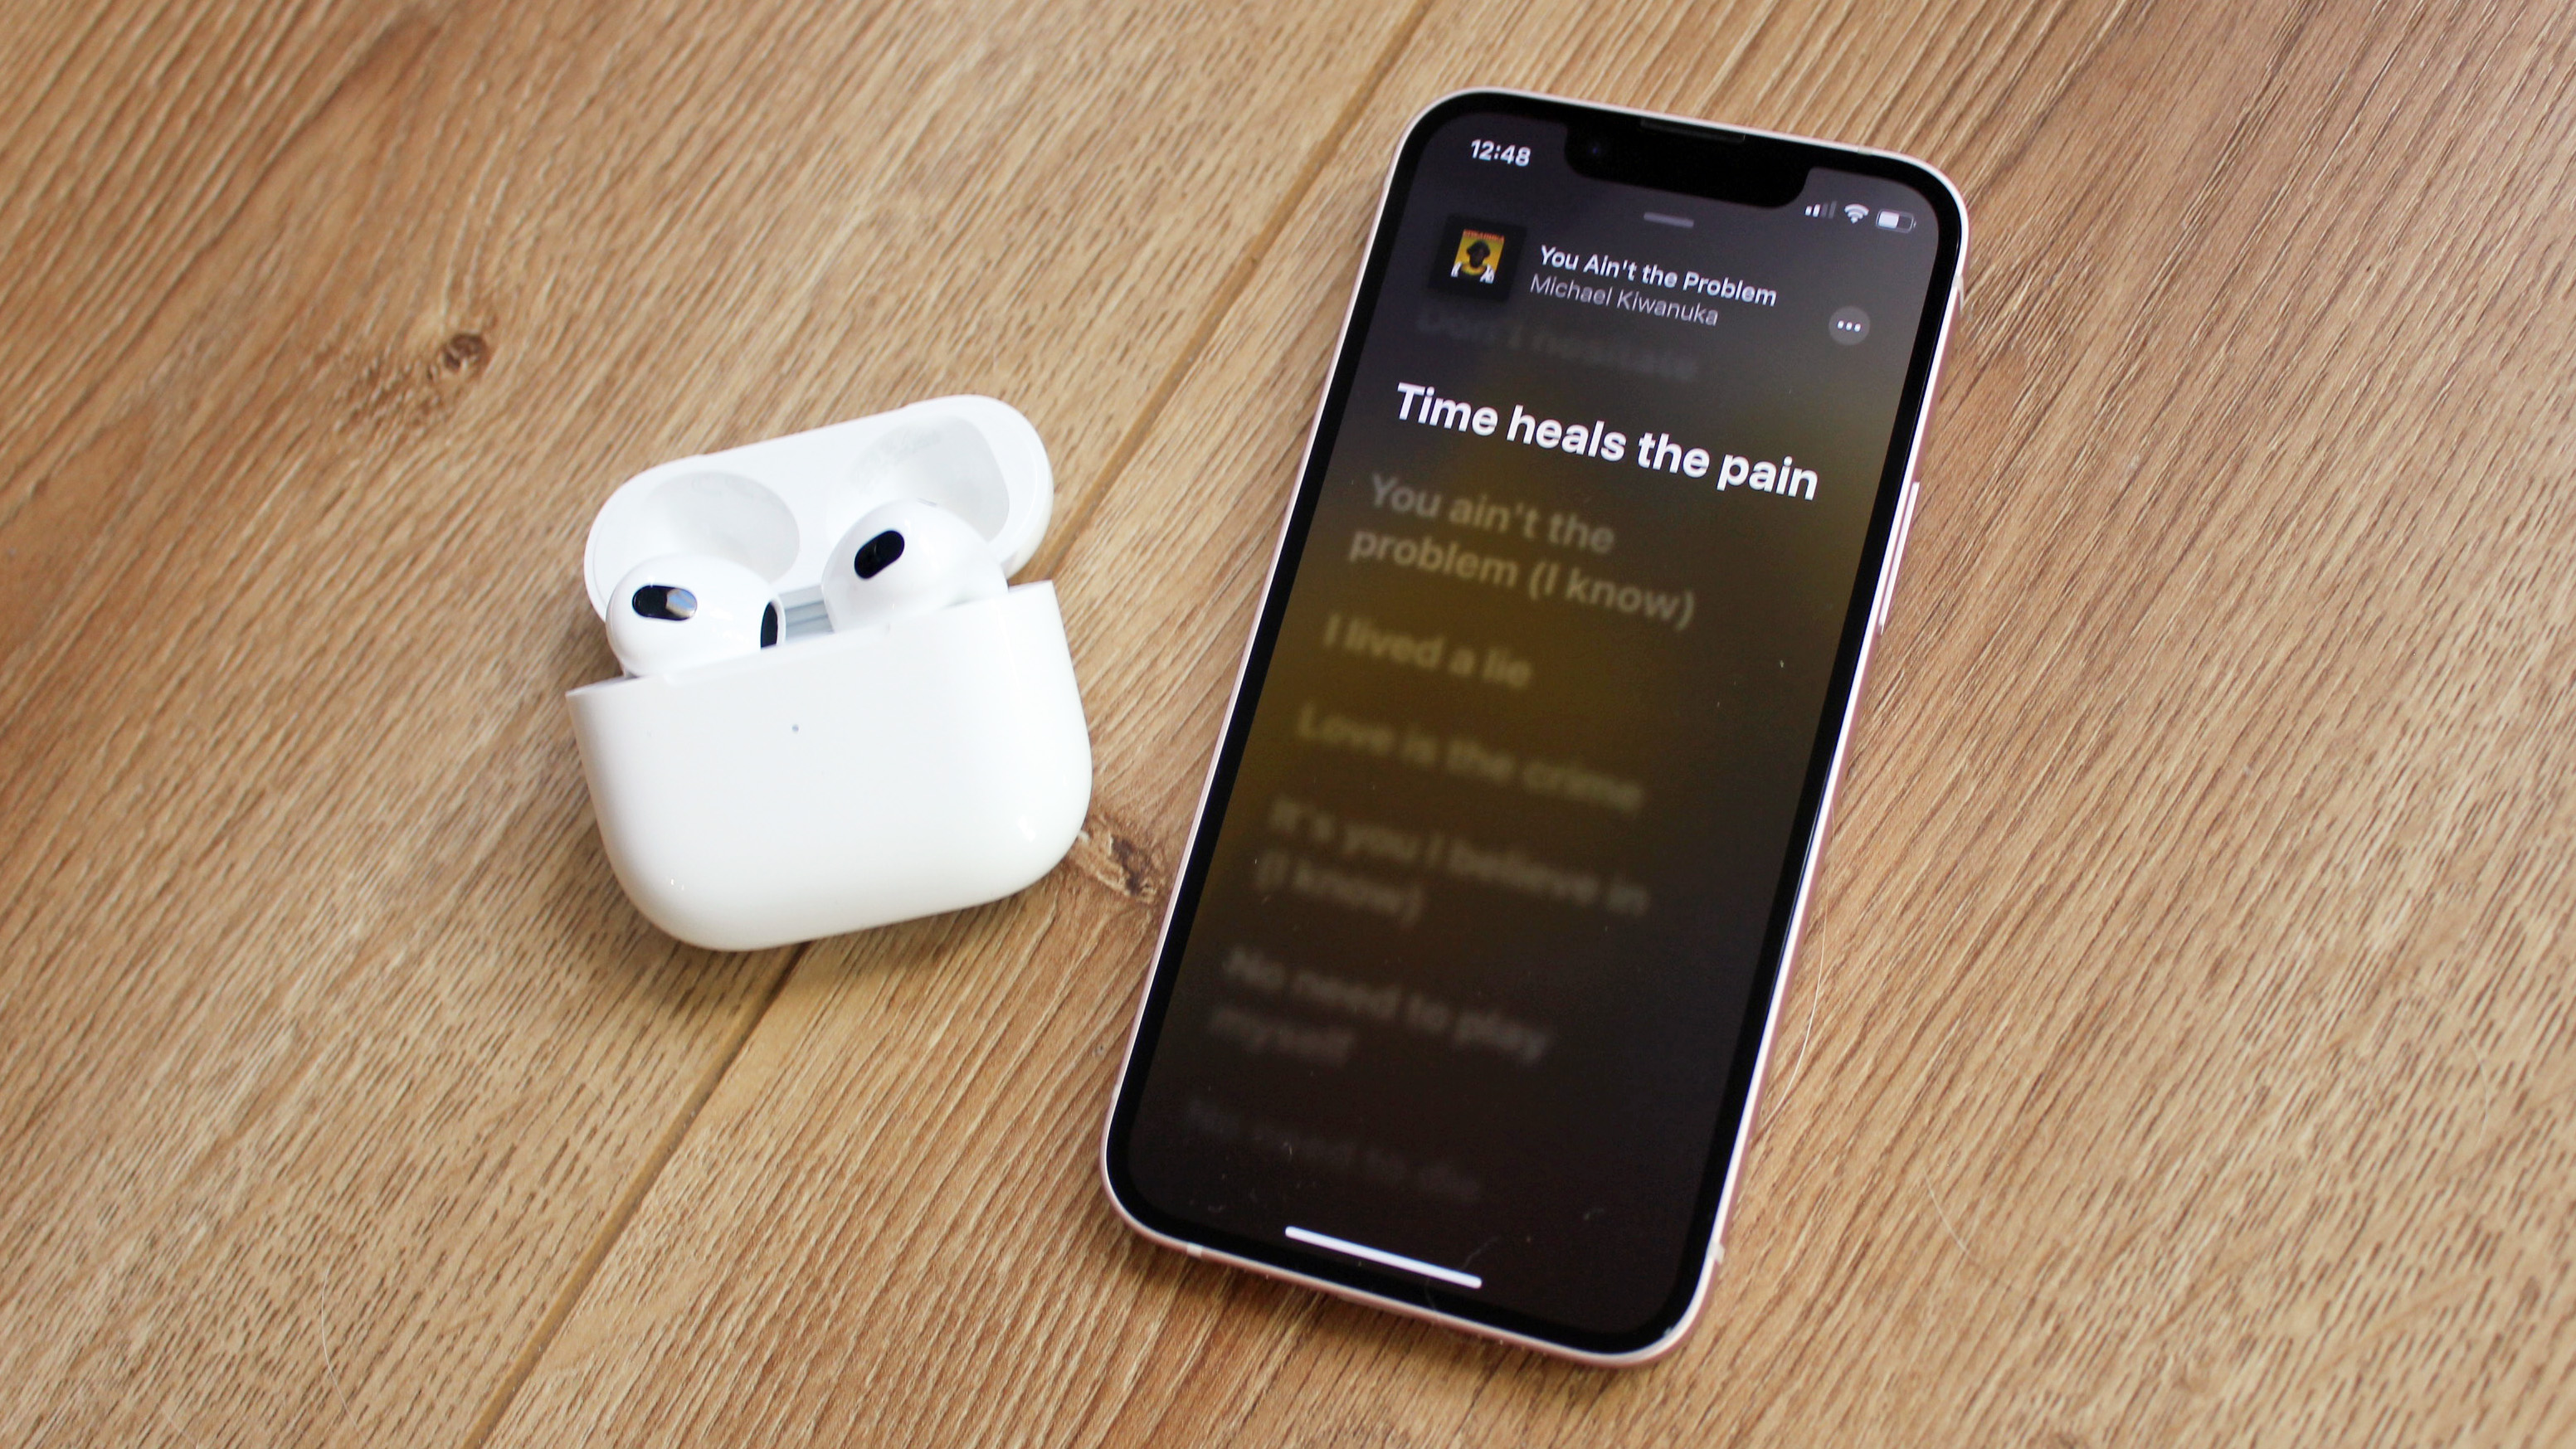 the airpods 3 next to an iphone playing apple music